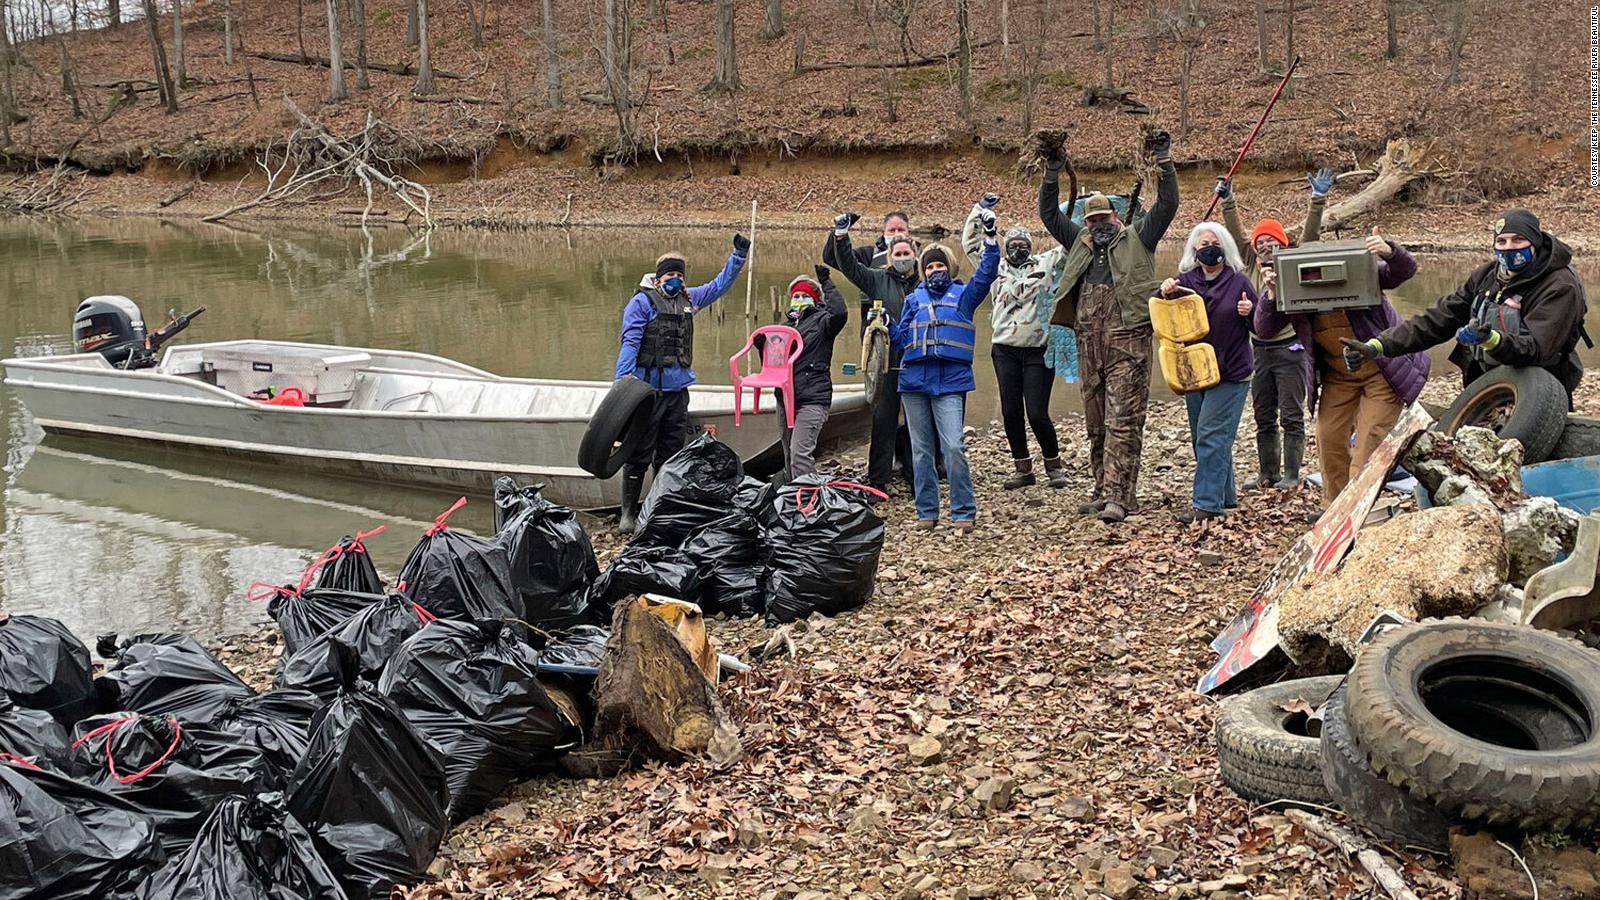 Volunteers remove more than 9,000 lbs of trash from Tennessee River CNN